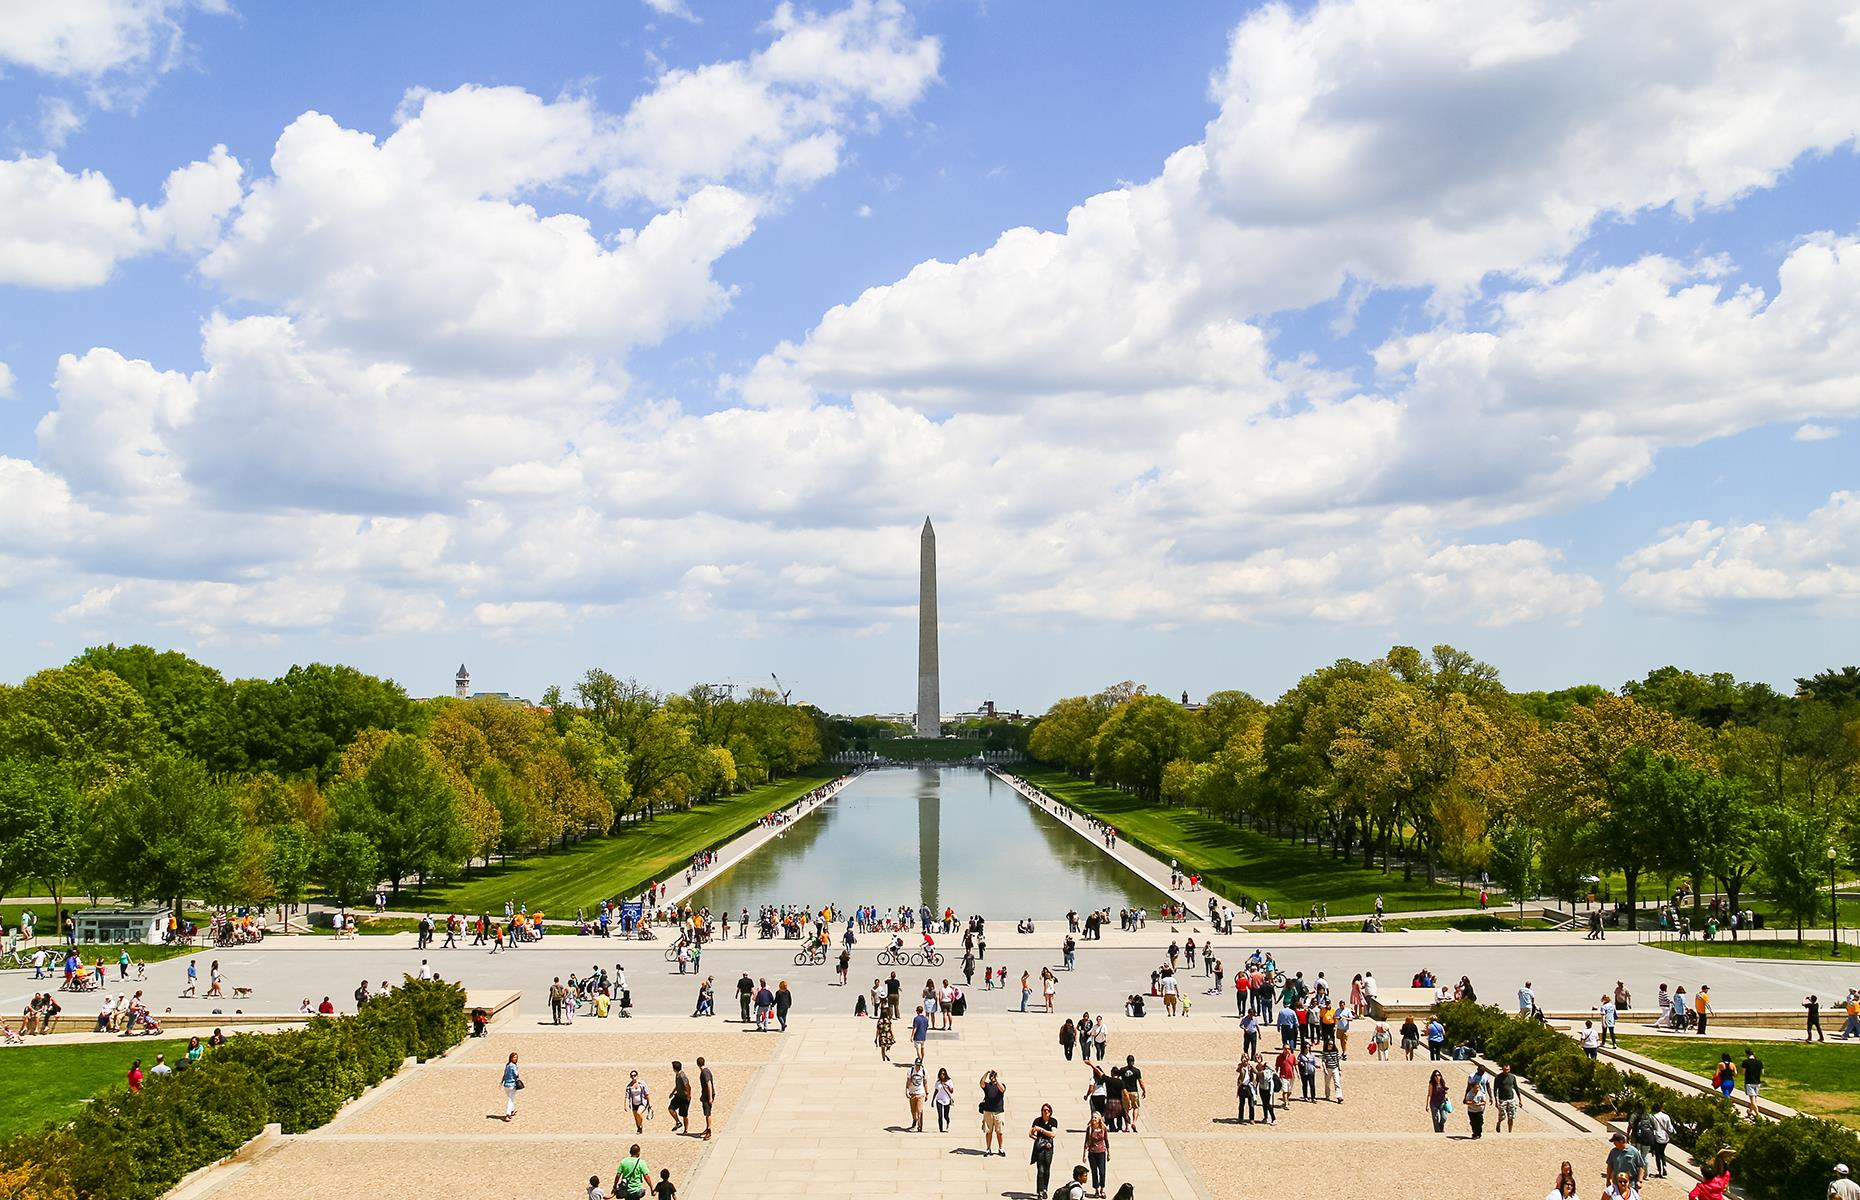 <p><a href="http://www.loveexploring.com/guides/86992/explore-washington-dc-top-things-to-do-where-to-stay-and-what-to-eat">The nation's capital</a> and its many attractions likely need no introduction. From the Smithsonian Museums to the trendy streets of Dupont Circle, there's plenty to see and do in DC, and bike sharing schemes and 'Circulator' bus routes make exploring the sprawling city a lot easier. DC is also a much greener city than many would expect, so wear comfortable shoes and be prepared to amp up your step count.</p>